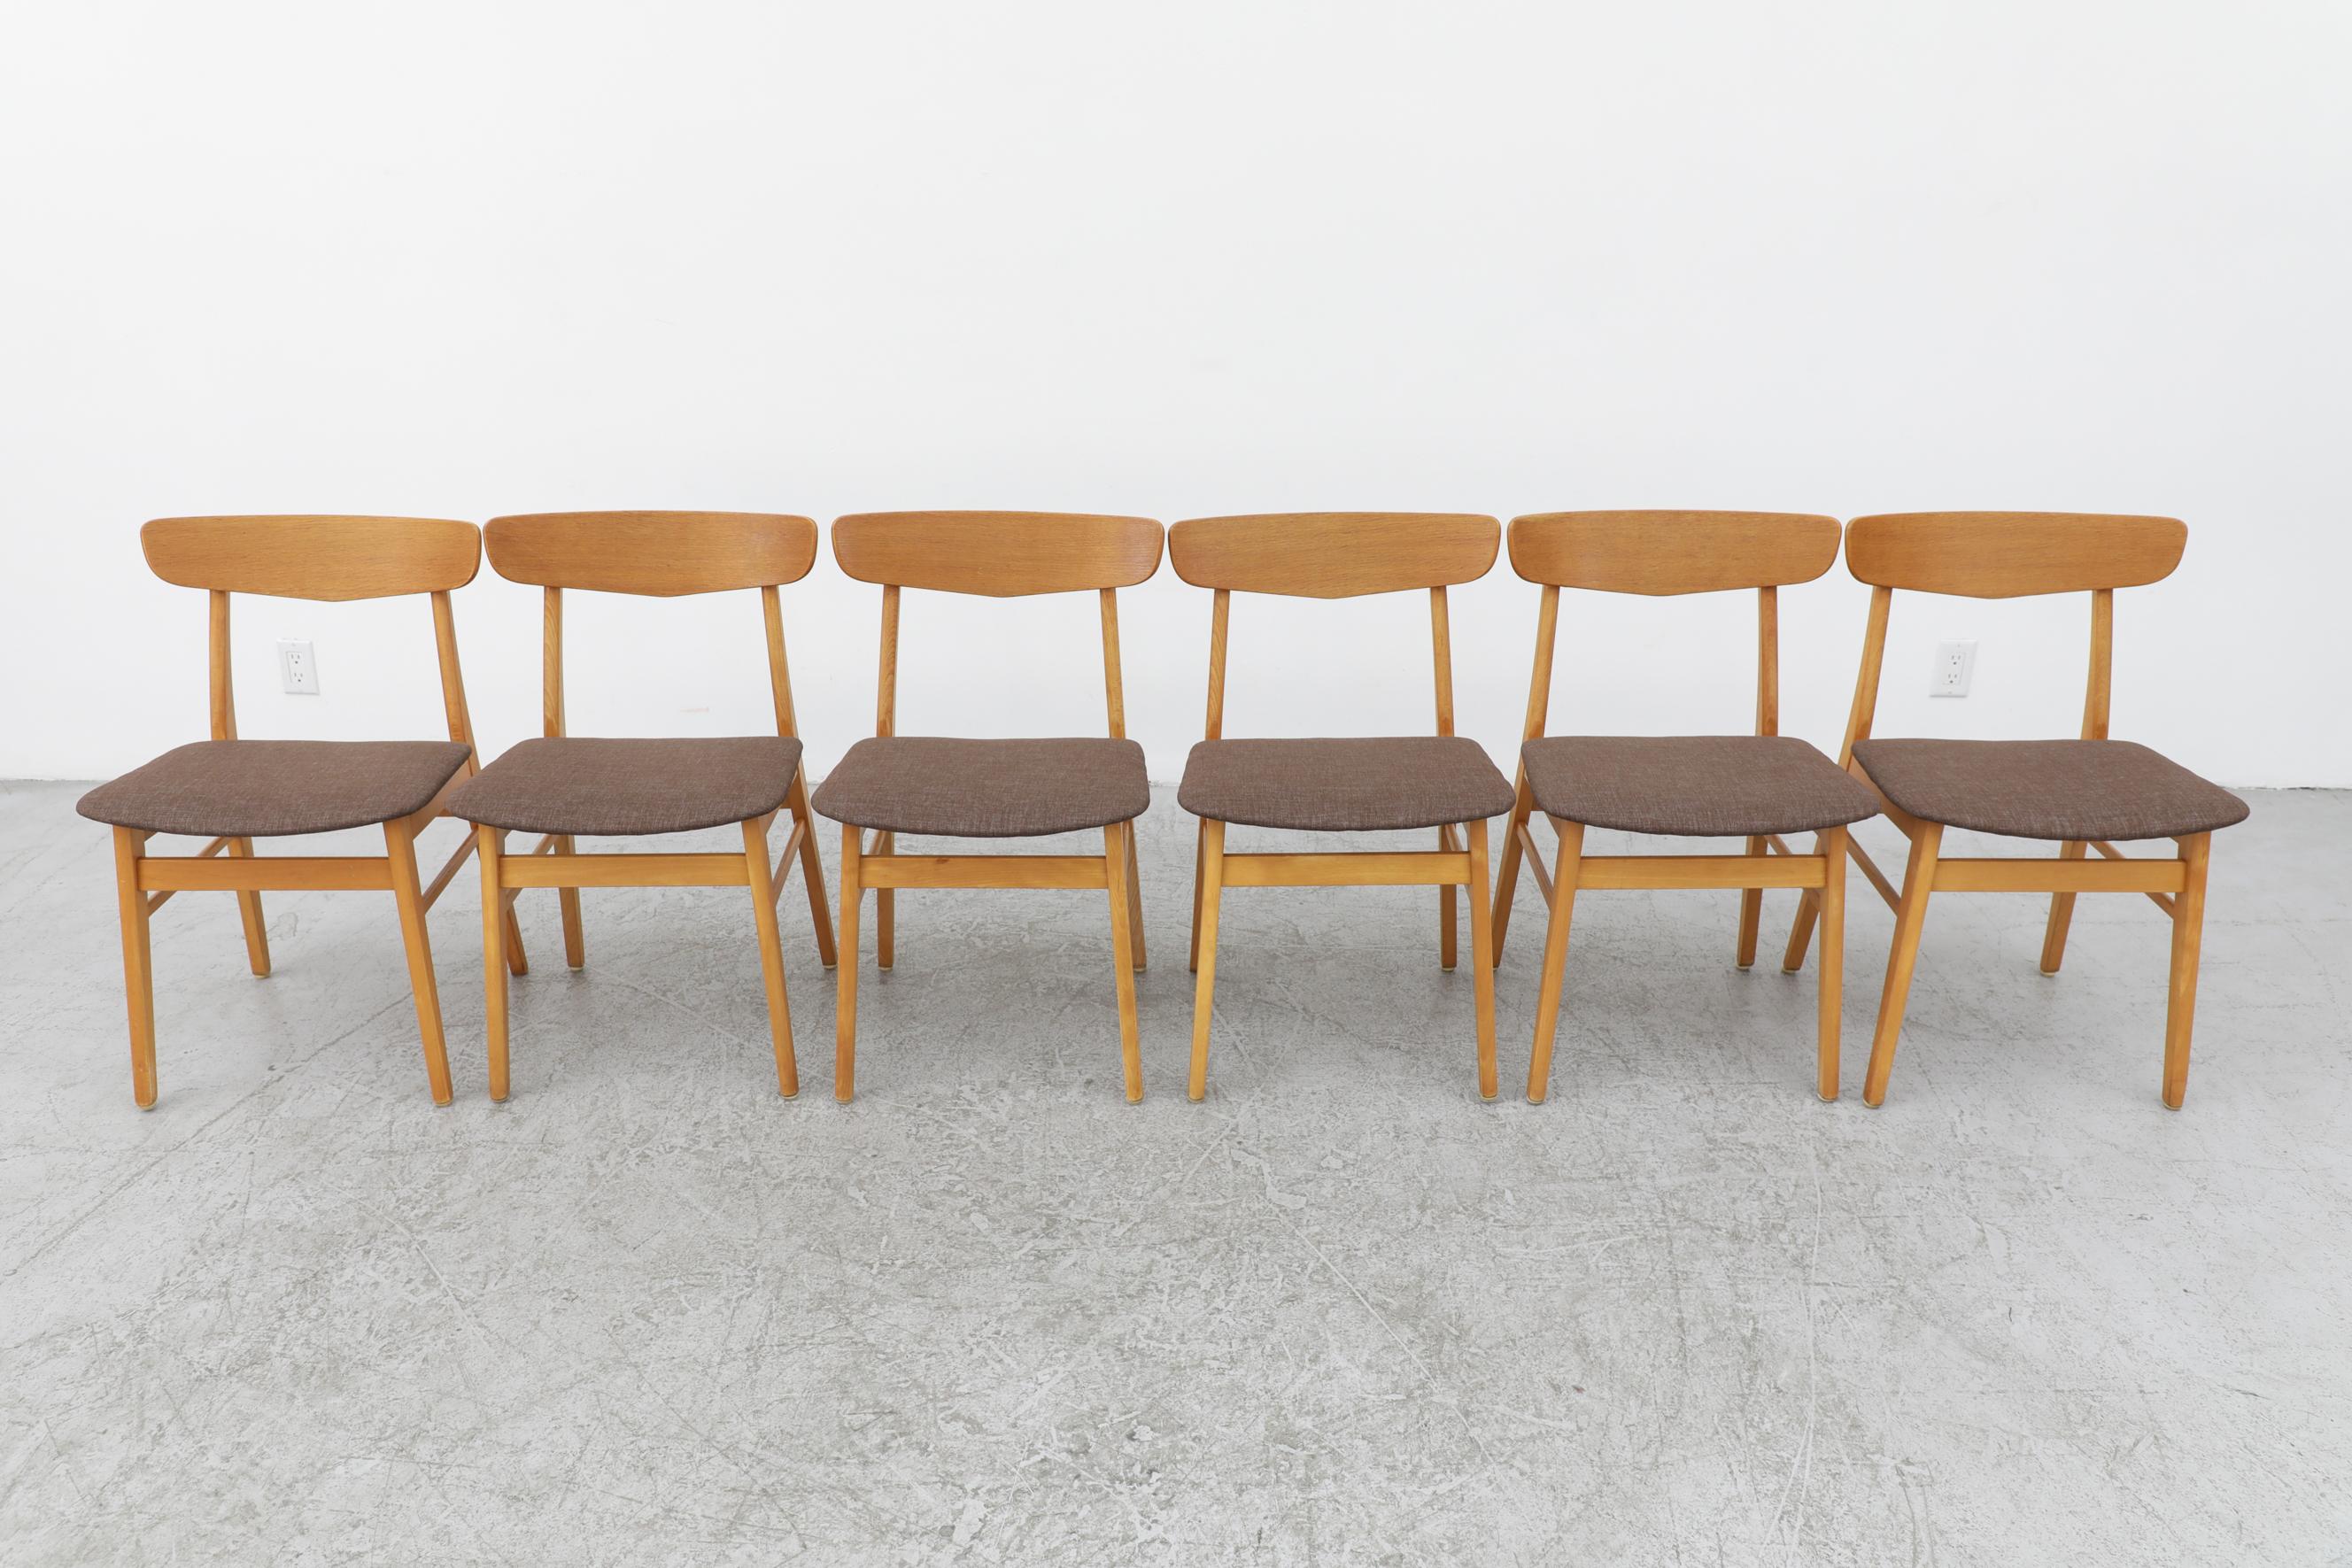 Set of 6 Borge Mogensen style dining chairs by Farstrup with a blonde wood frame and signature 60's curved teak back with seemingly floating seats. The upholstery may have been changed by previous owner. In otherwise original condition with some